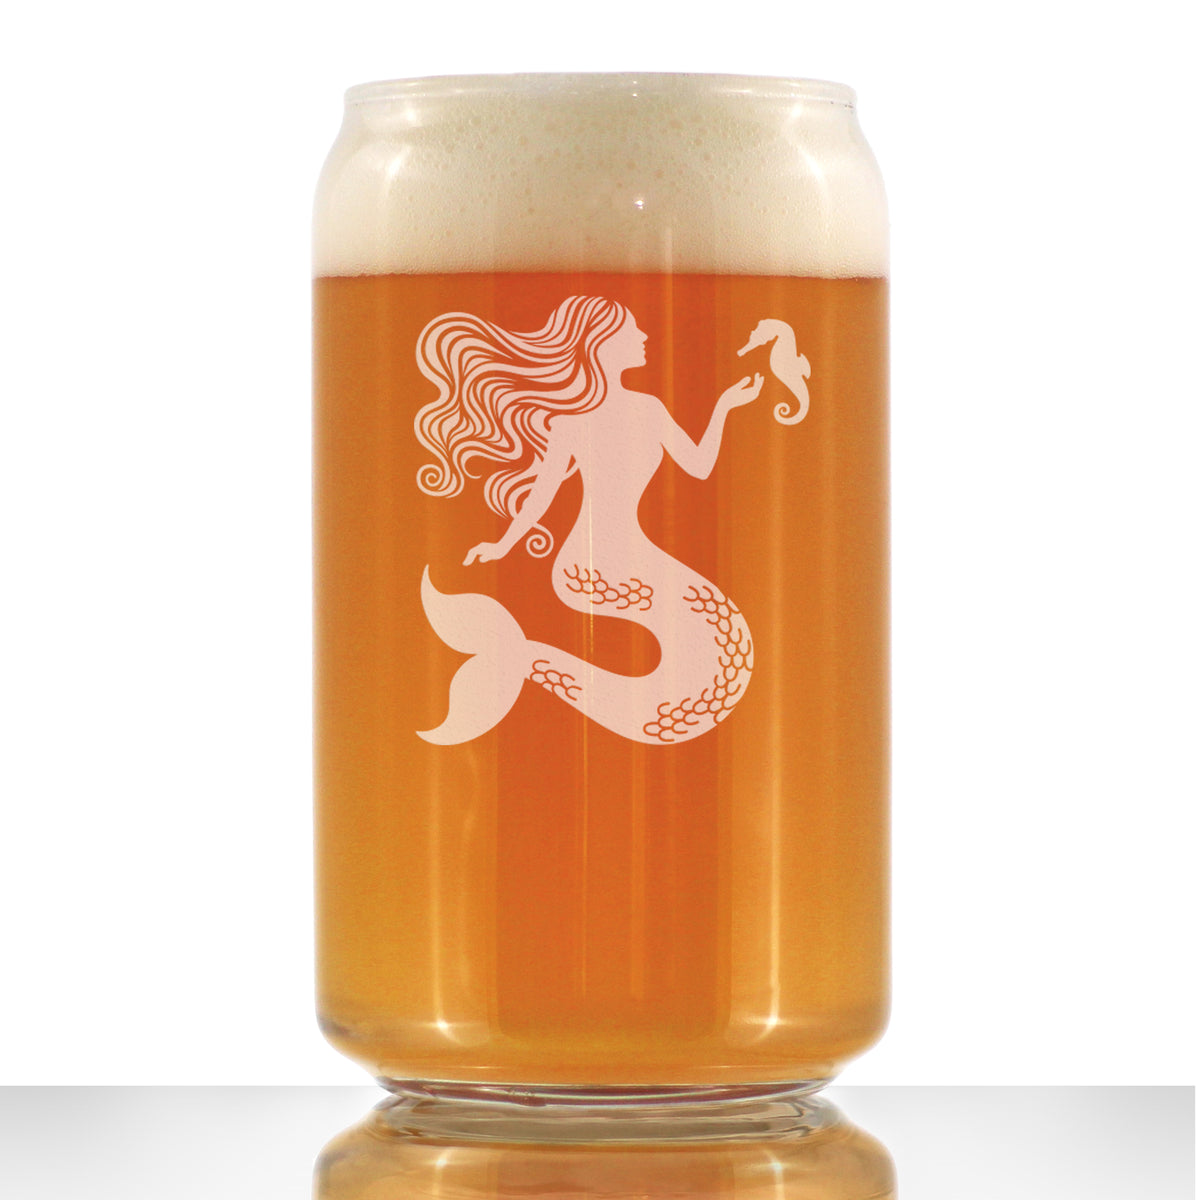 Mermaid Beer Can Pint Glass - Fun Mermaids Themed Decor and Gifts for Beach Lovers - 16 Oz Glasses